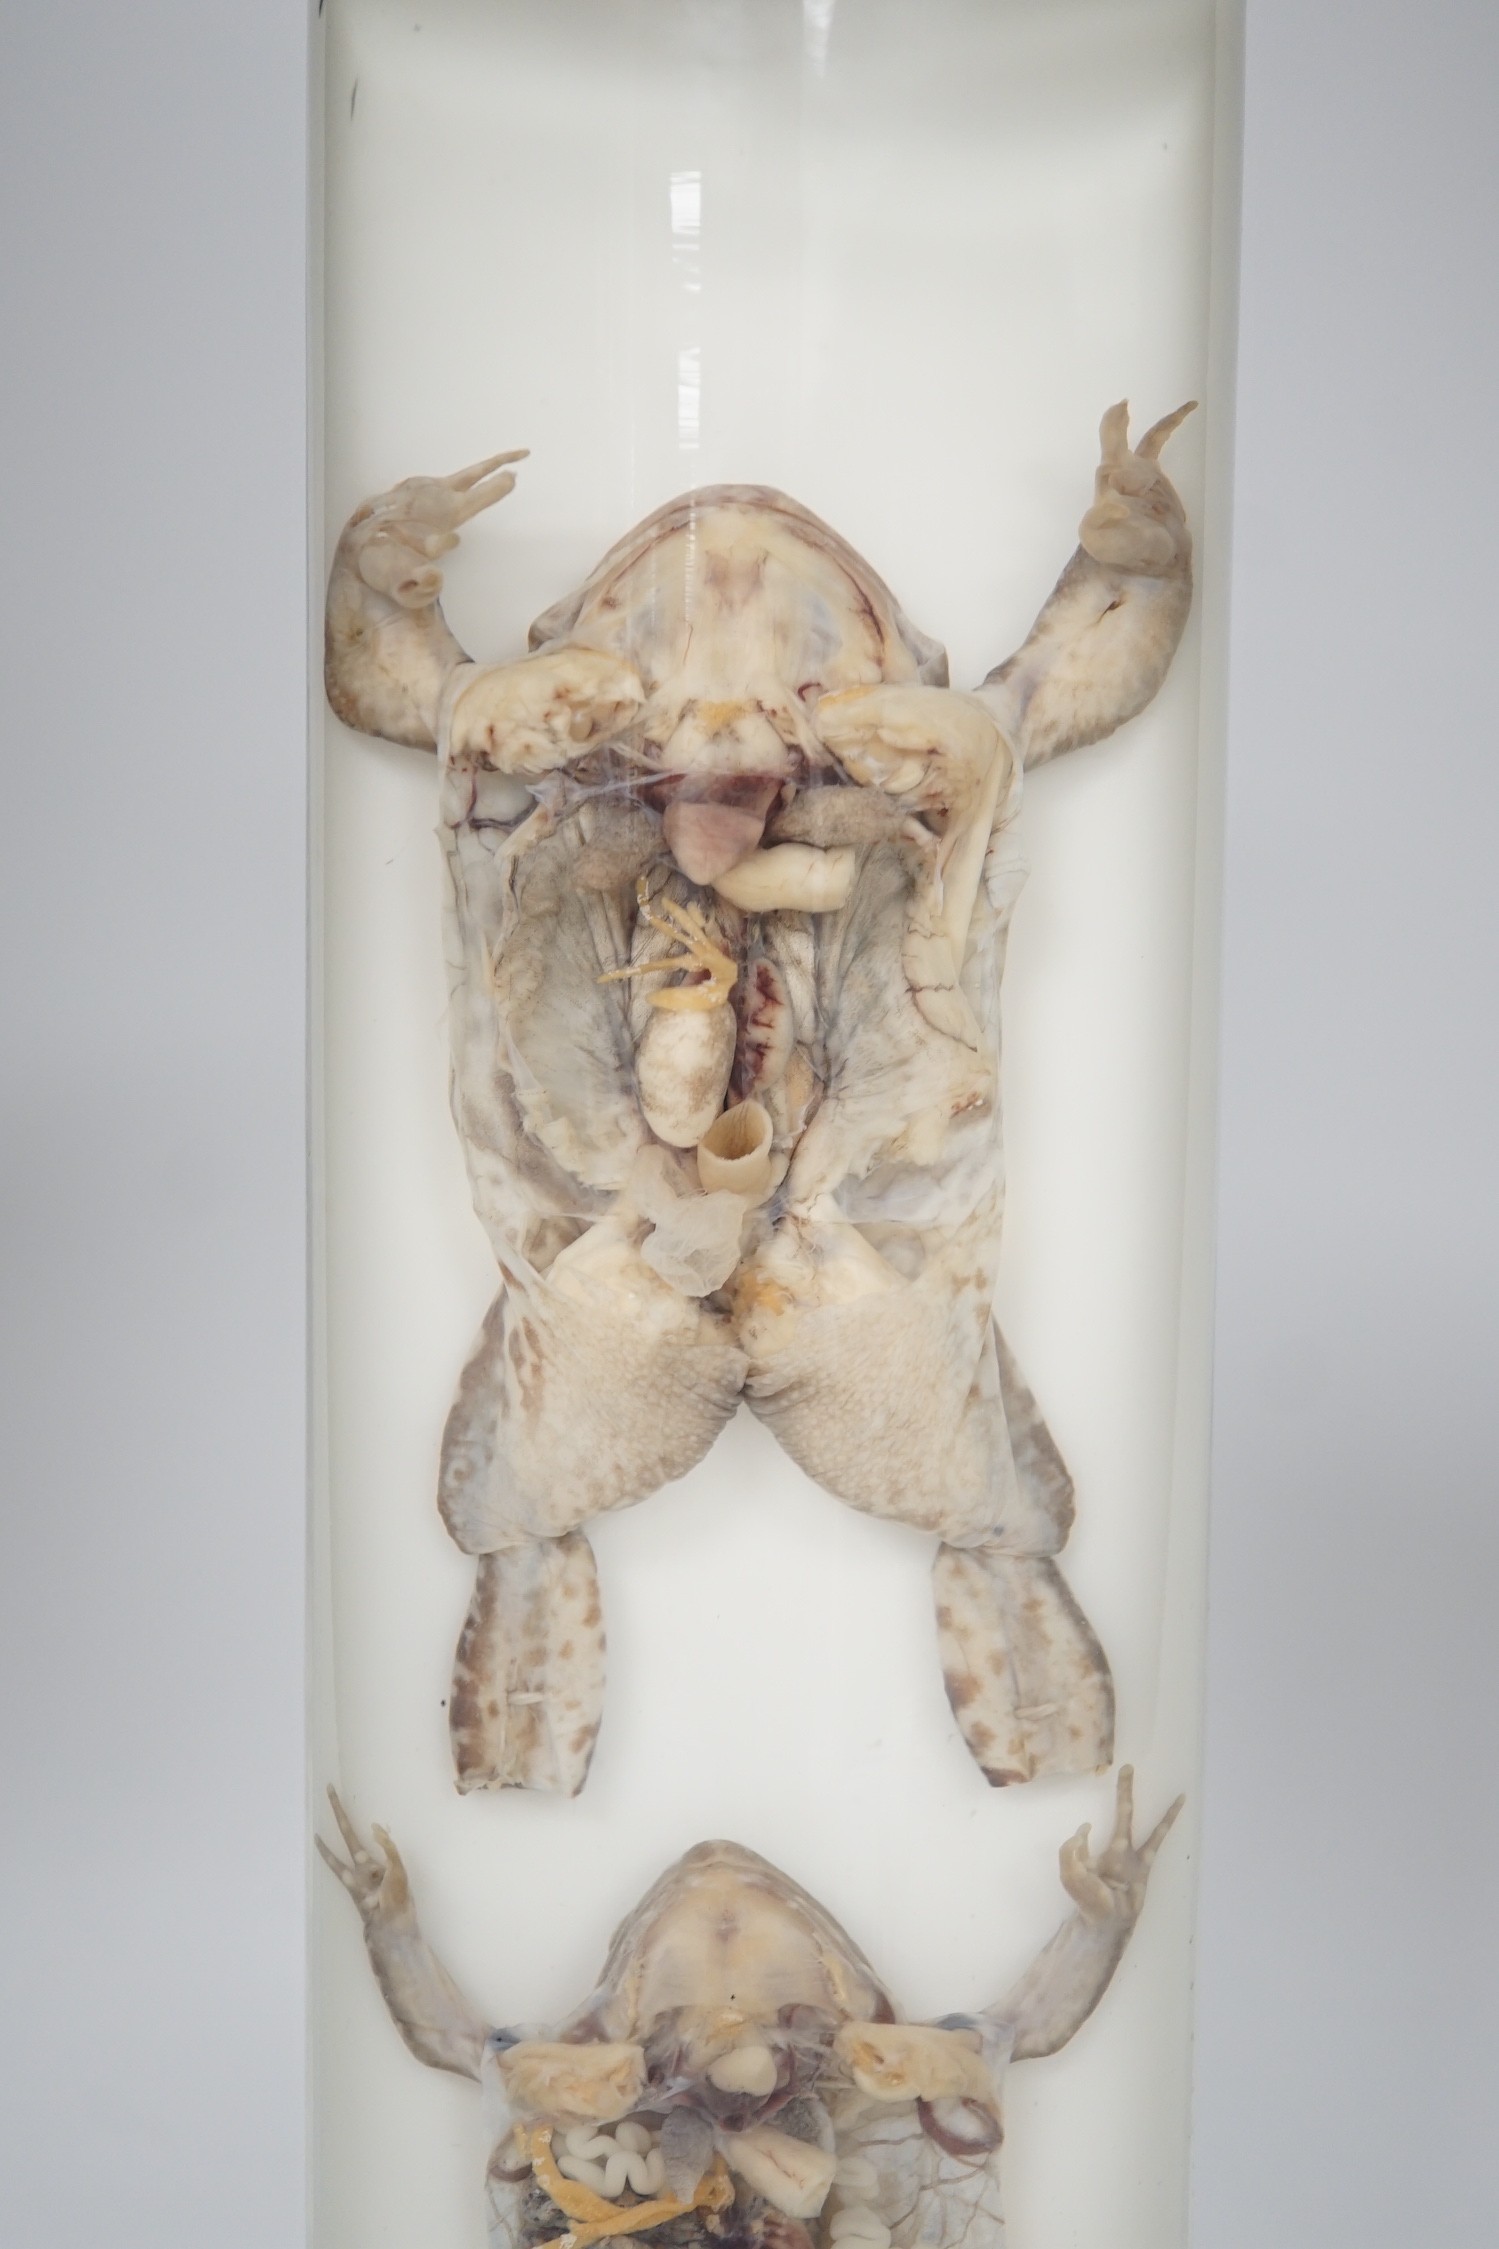 A biological specimen - Rana Temporaria (Common frog) reproductive systems, male and female forms, prepared by Flatters and Garnett, Manchester, circa 1920's/30's. 31cm high